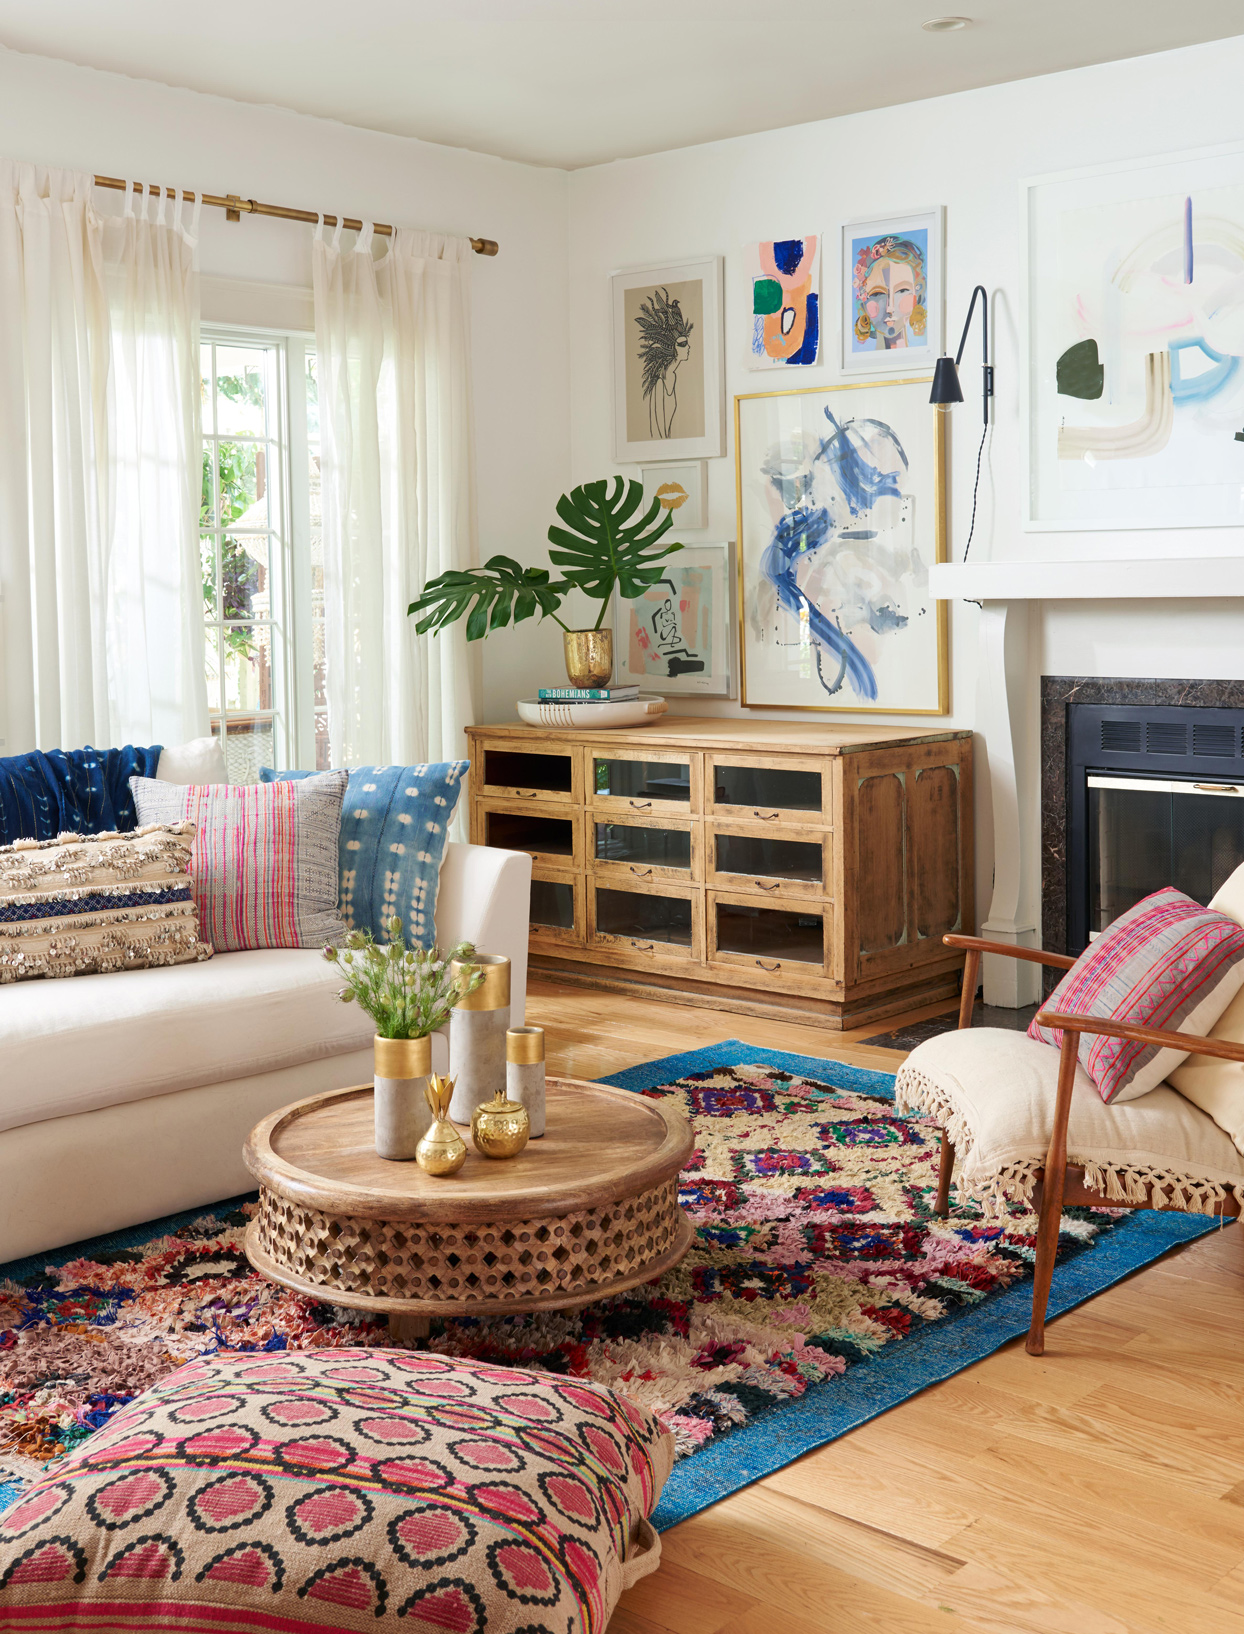 What is a boho chic home?